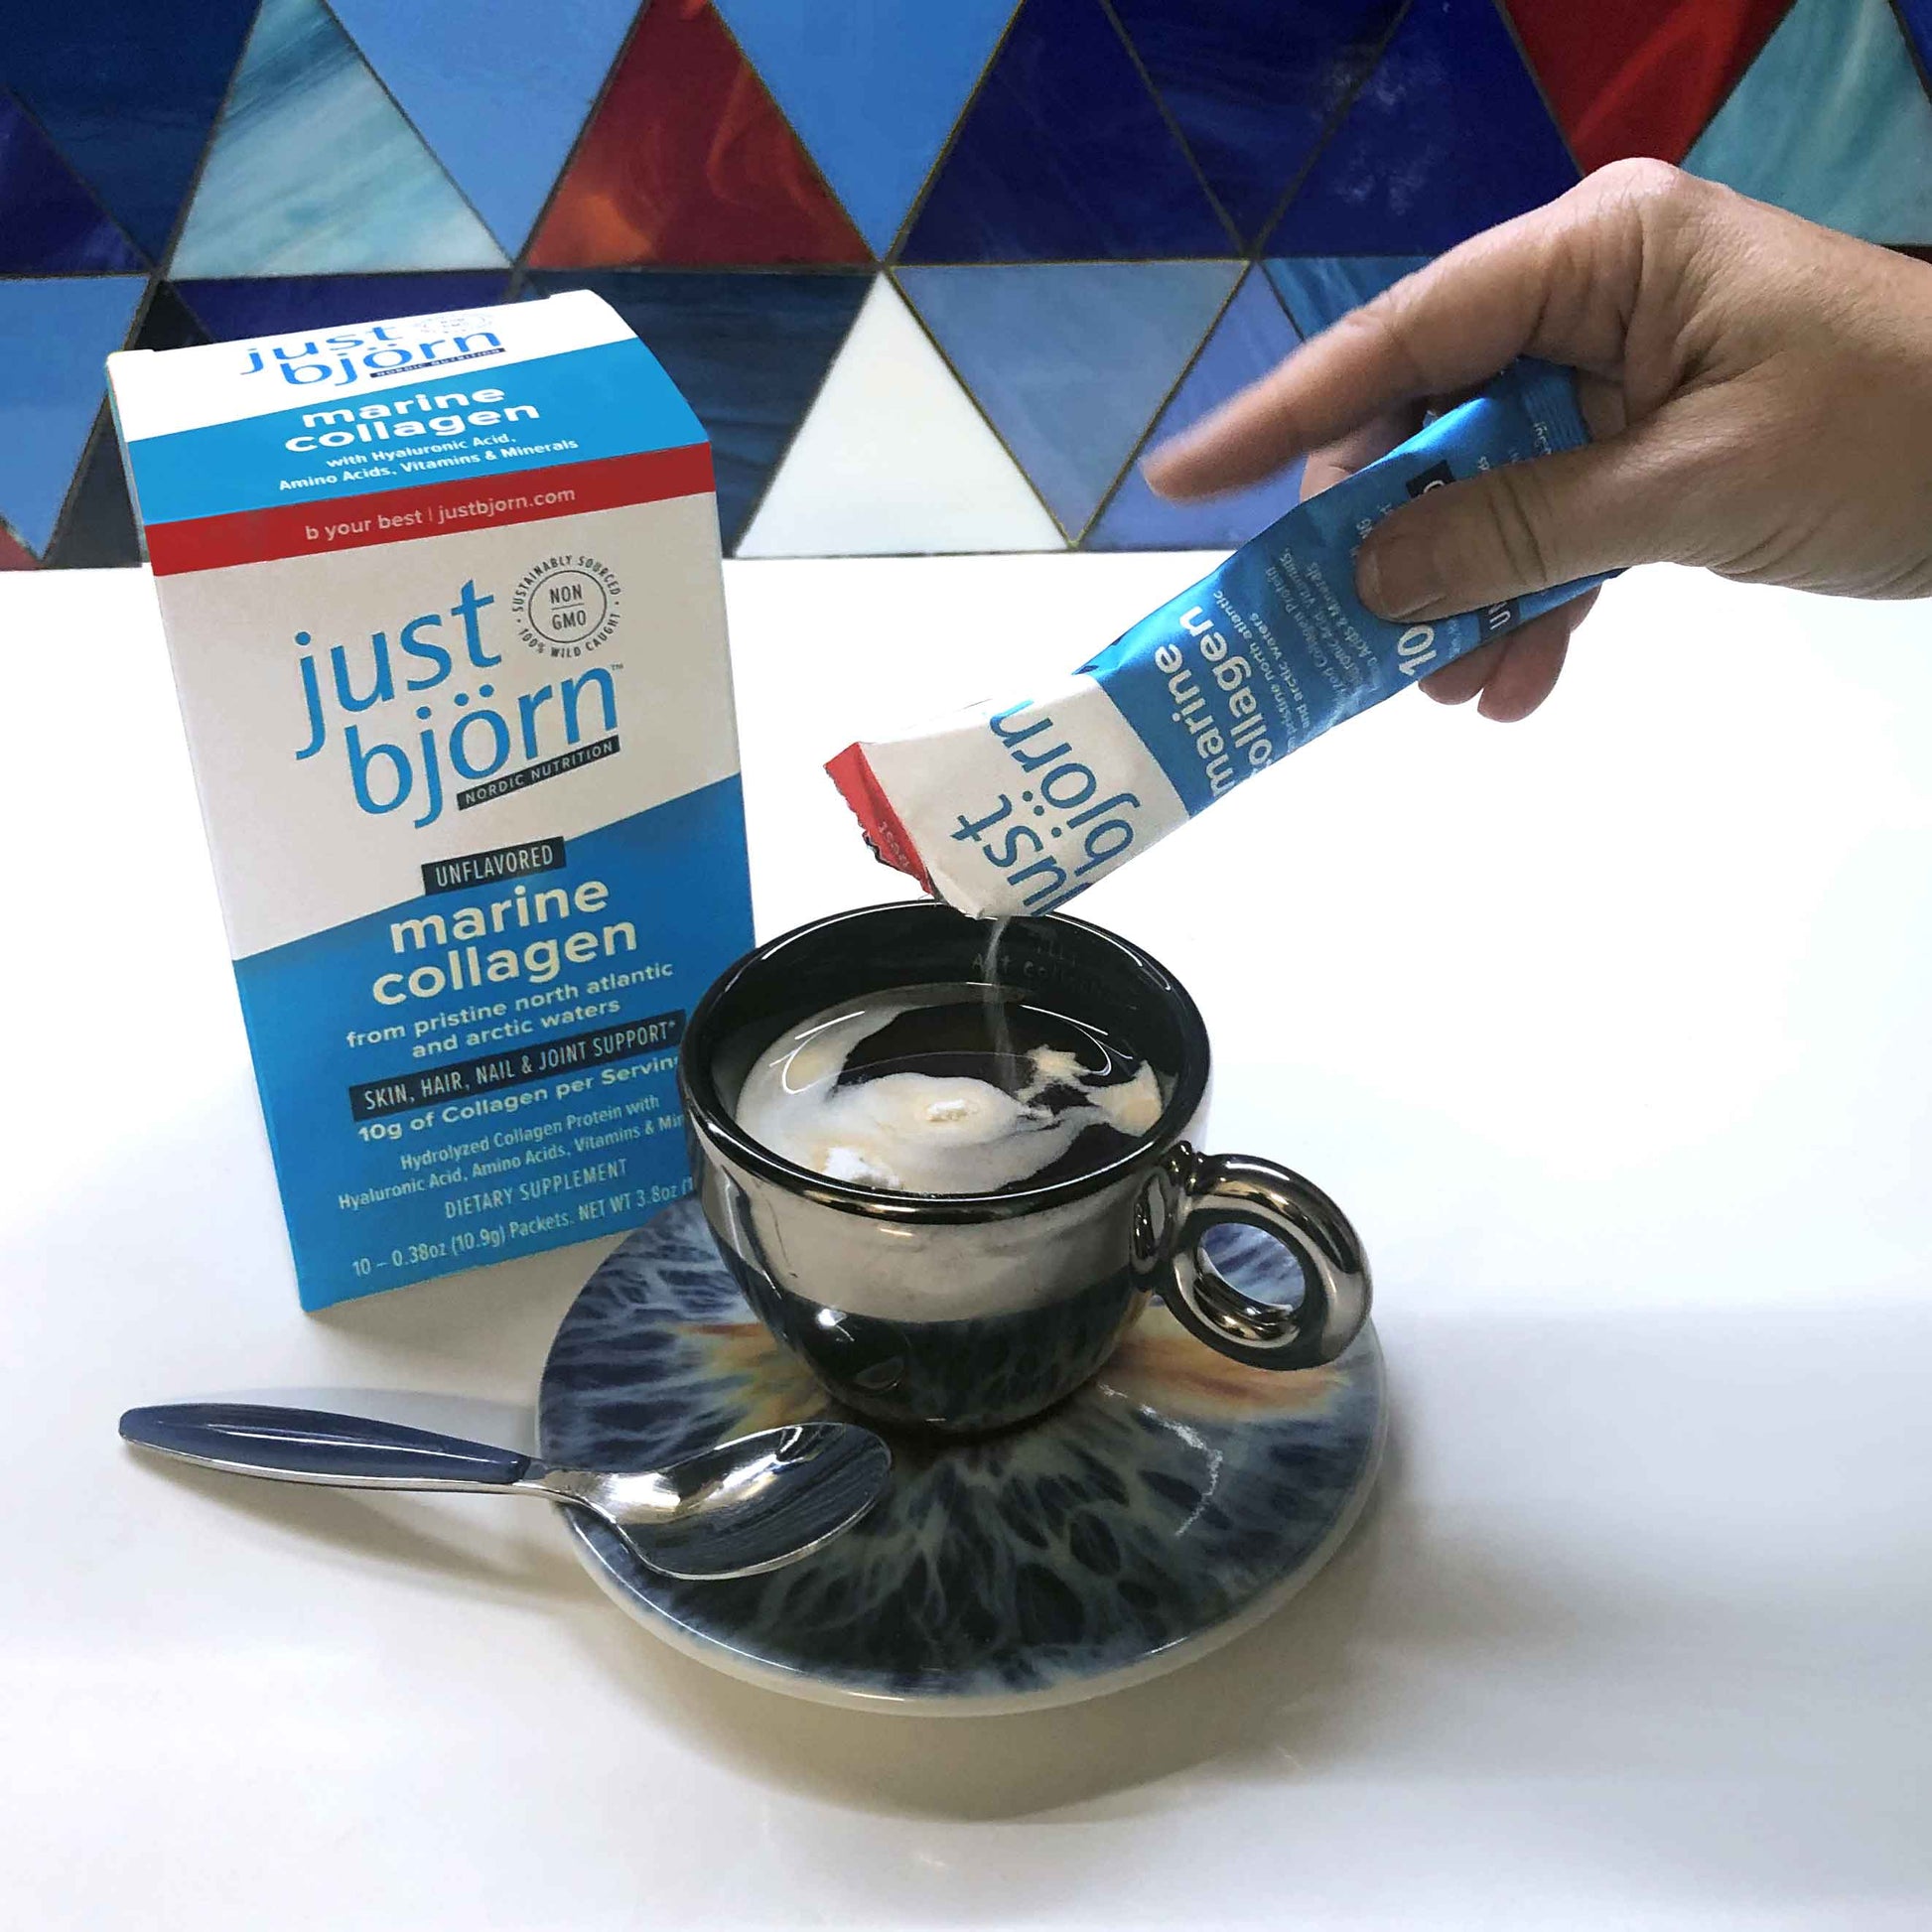 person pouring just björn on their coffee (just björn stick pack box in the background)